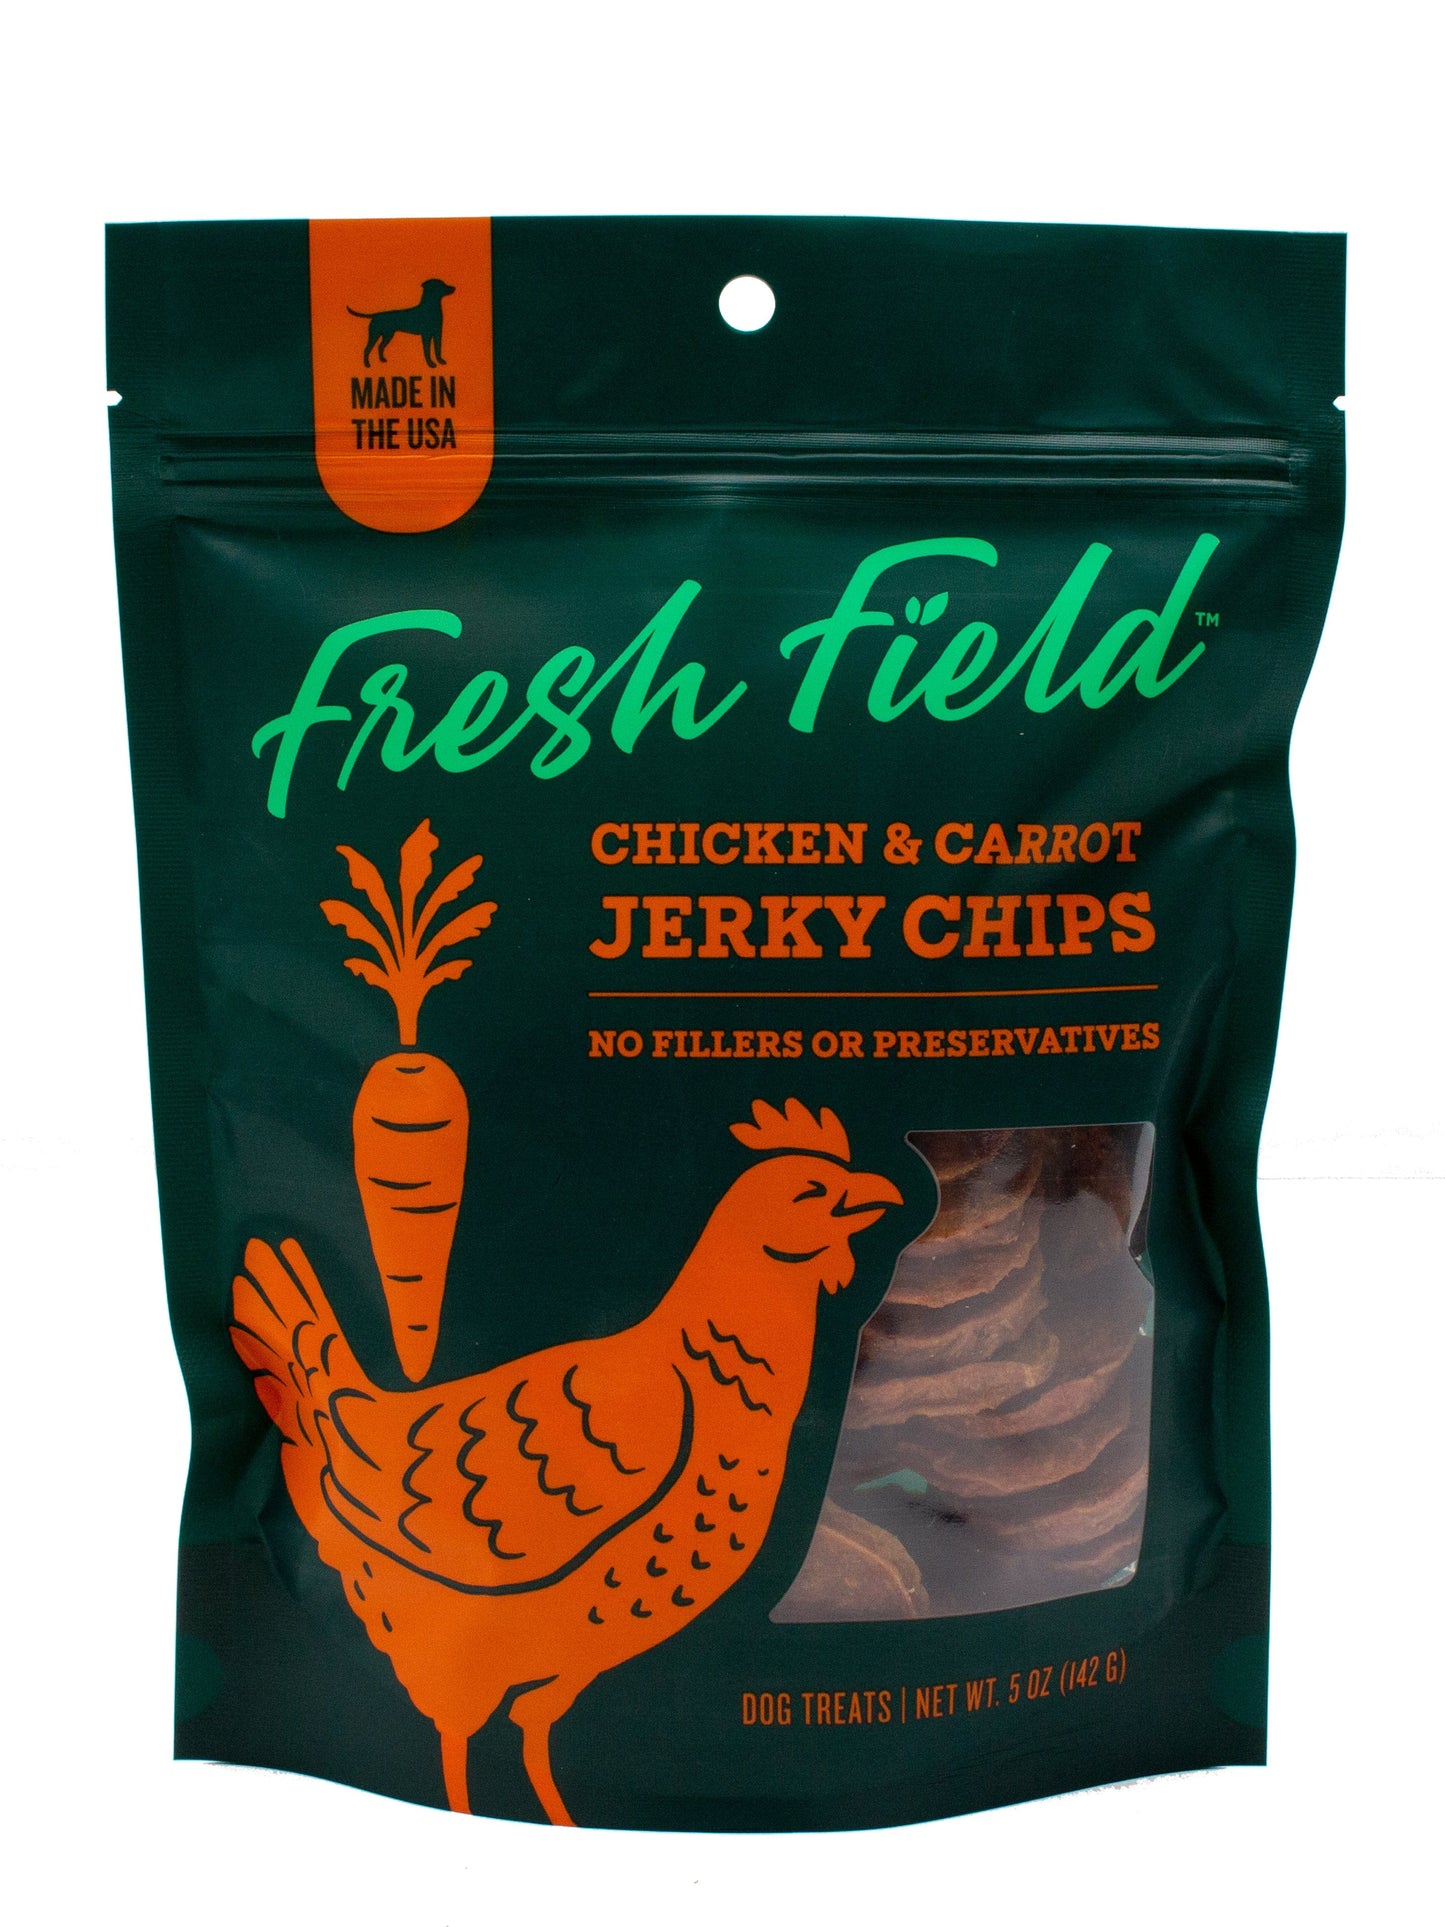 A photo of the front of the best 5 oz Chicken and Carrot Jerky Chips Dog Treats from Colorado Pet Treats by Fresh Field. Colorado Pet Treats - All-Natural, All-American Dog Jerky, Jerky Chips, and Bones - Treat your furry friend to our delicious and healthy pet treats made with only the finest ingredients sourced in the USA. The best crunchy and savory jerky chips made with all-natural ingredients and baked to perfection.